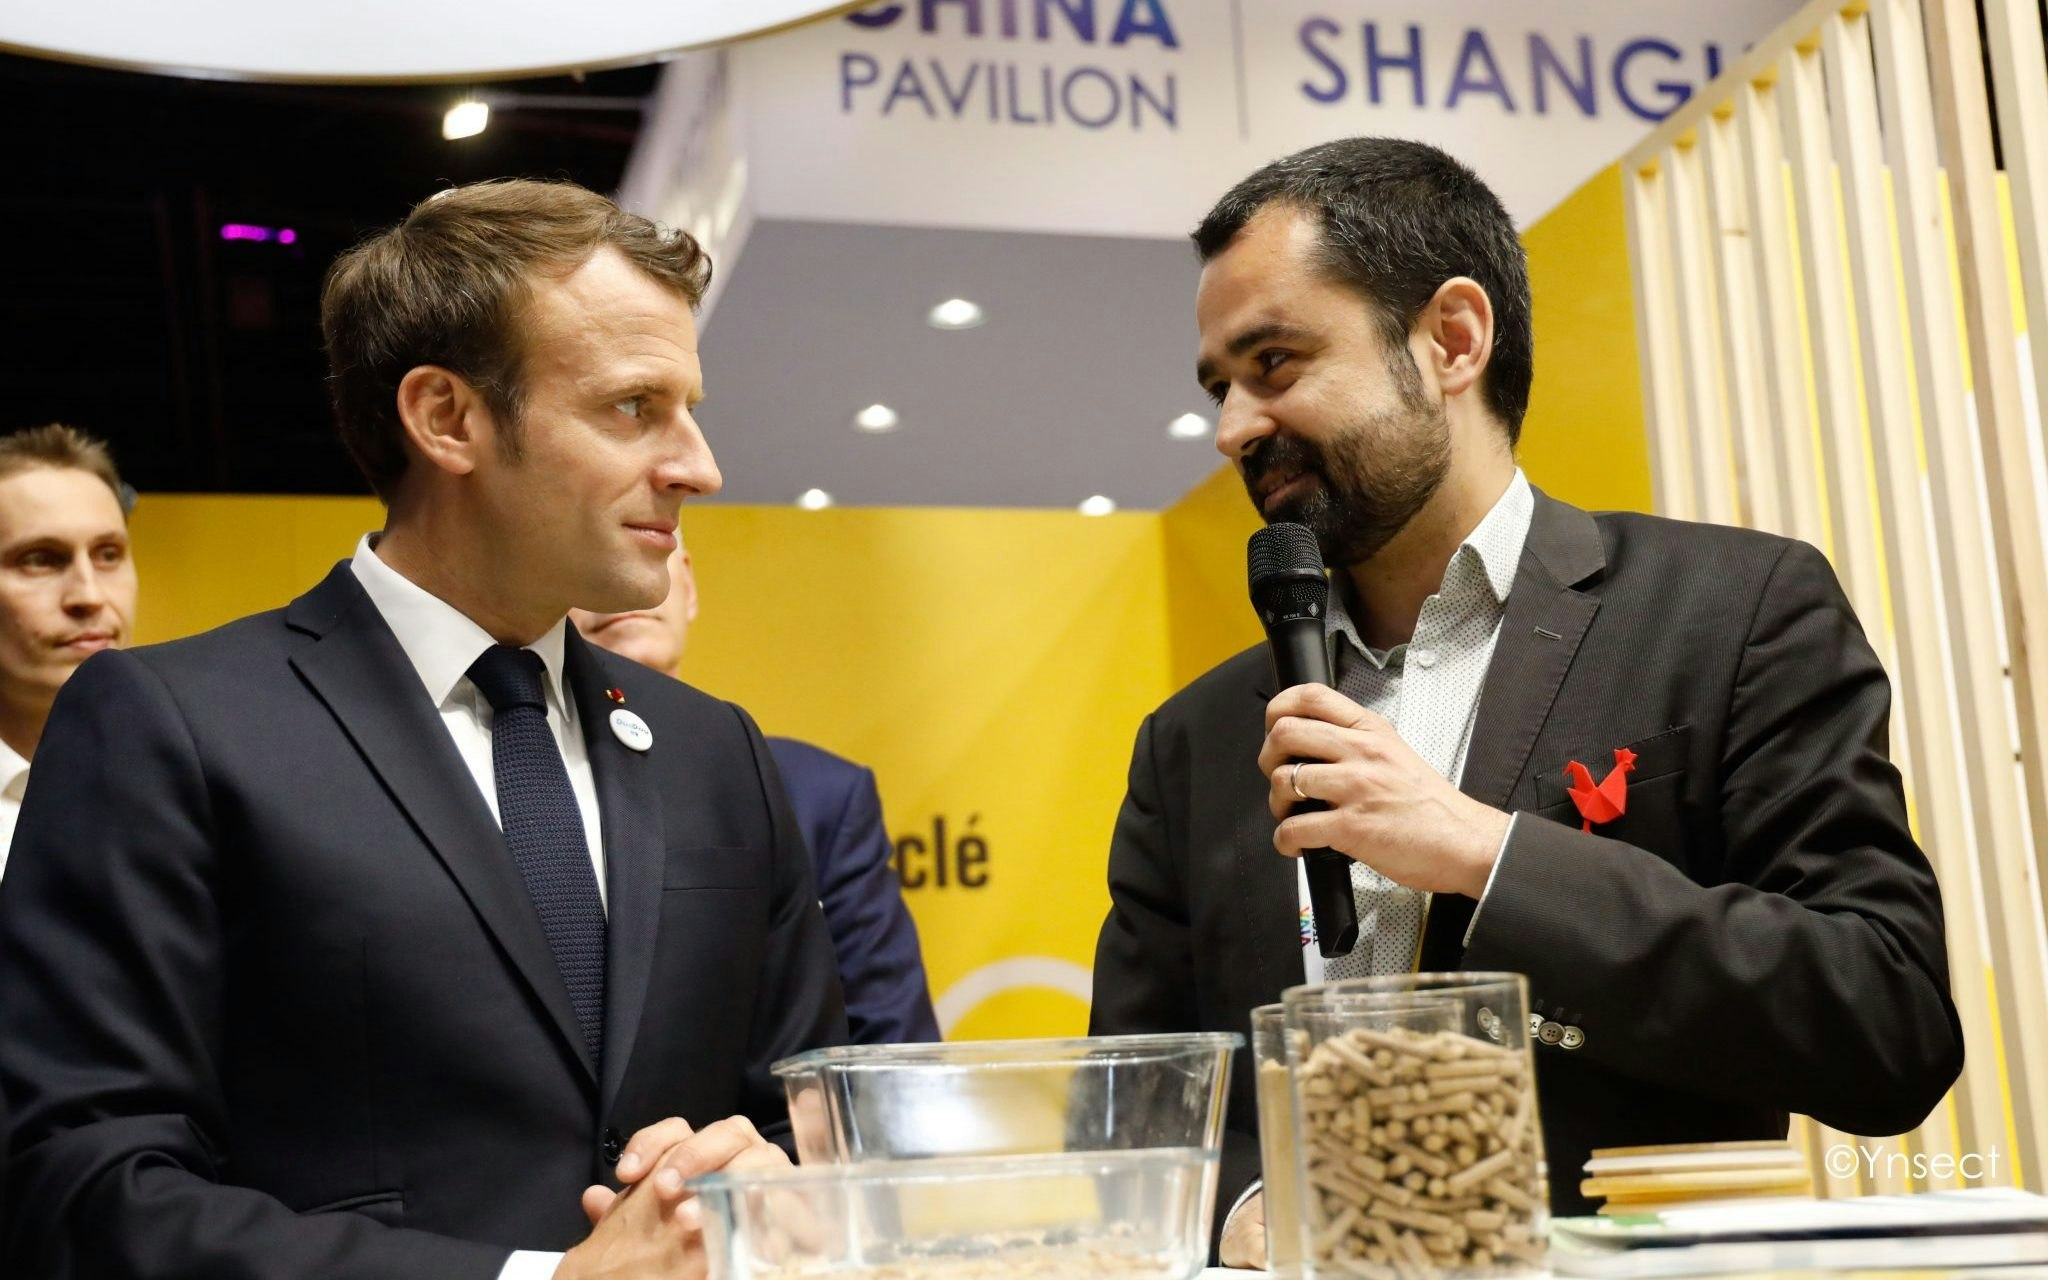 French president Macron with Ynsect founder Antoine Hubert